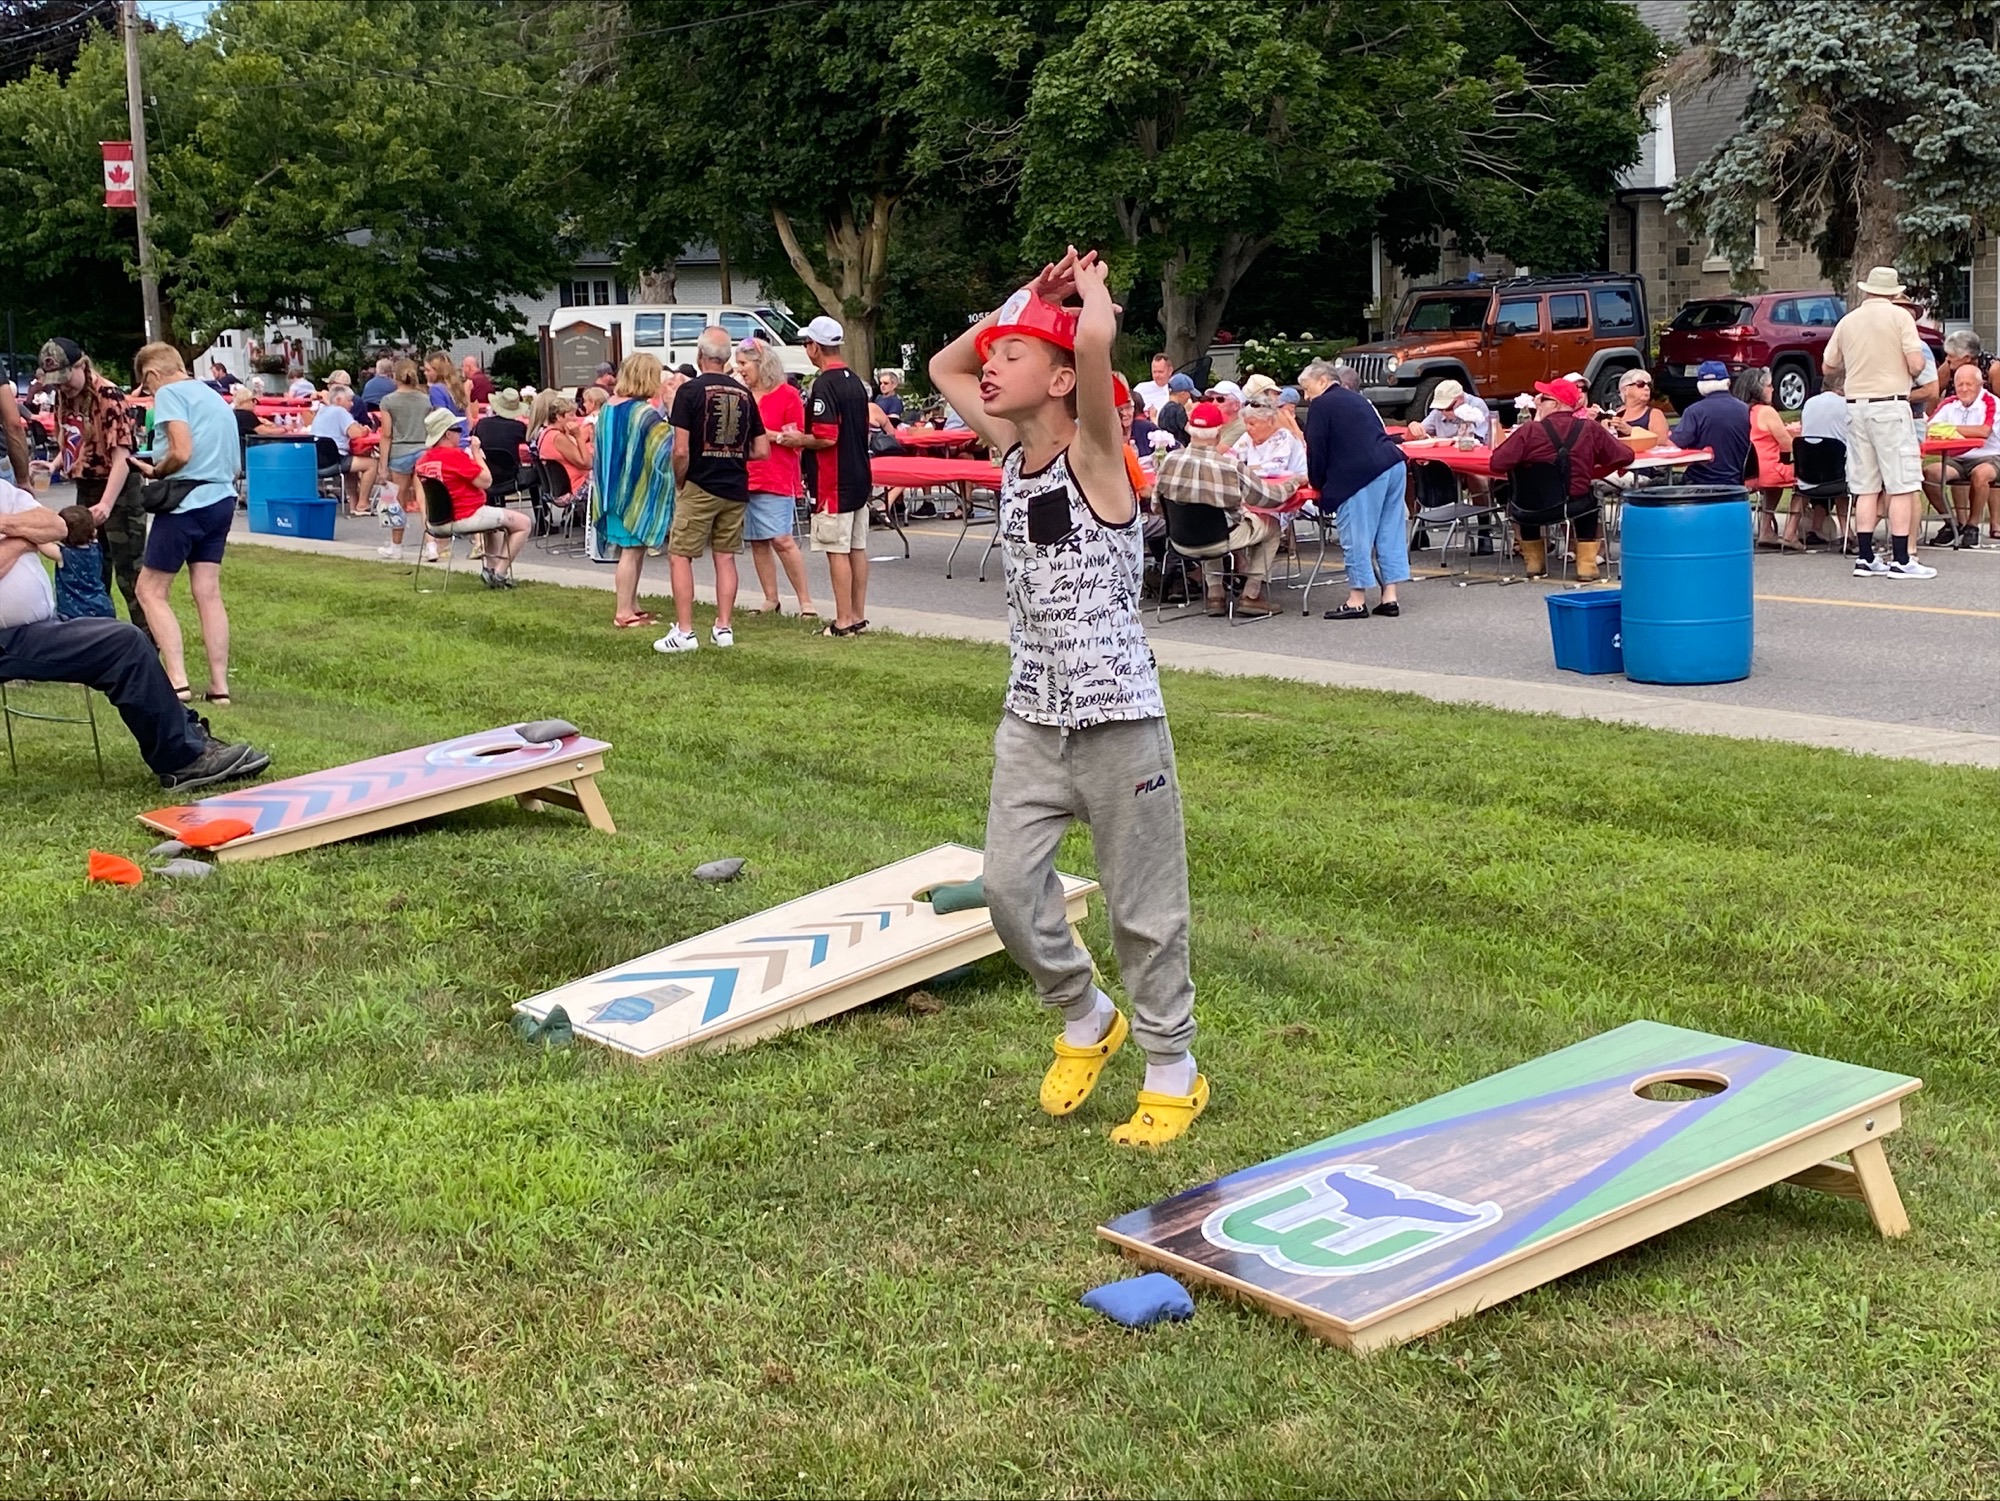 Cornhole games being played